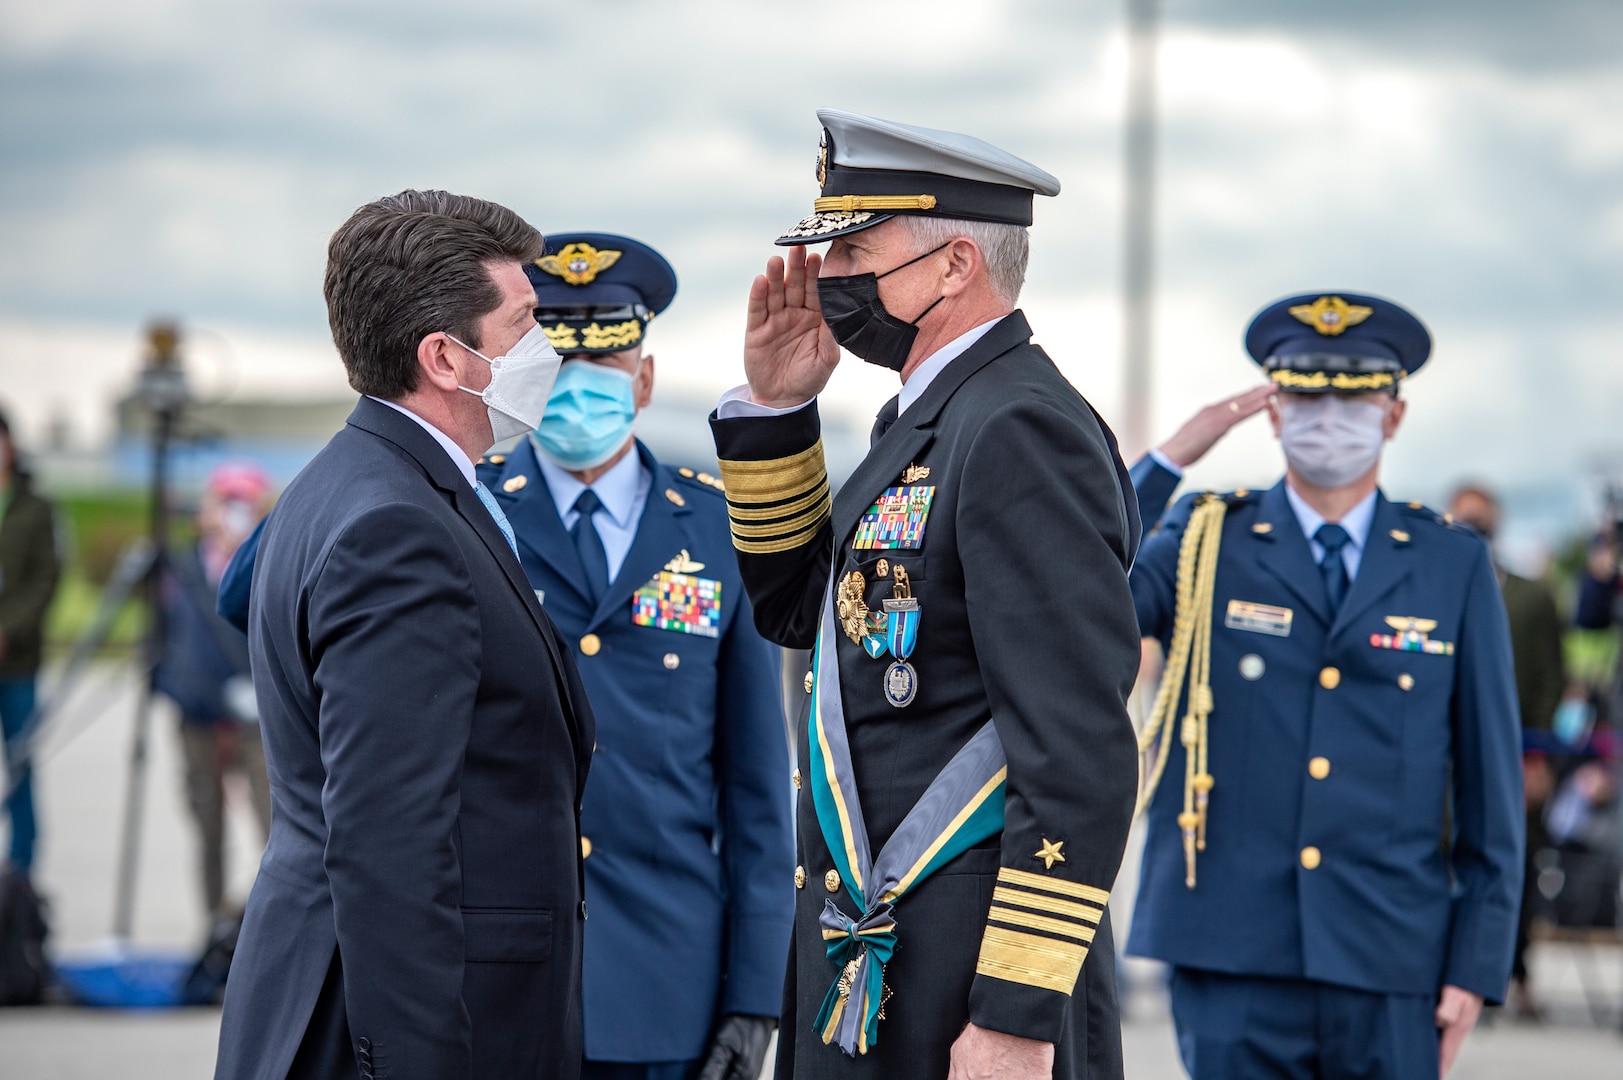 Colombian Minister of Defense Diego Molano presents U.S. Navy Adm. Craig S. Faller, commander of U.S. Southern Command, with the country’s military medal in the Grand Cross category for distinguished service.